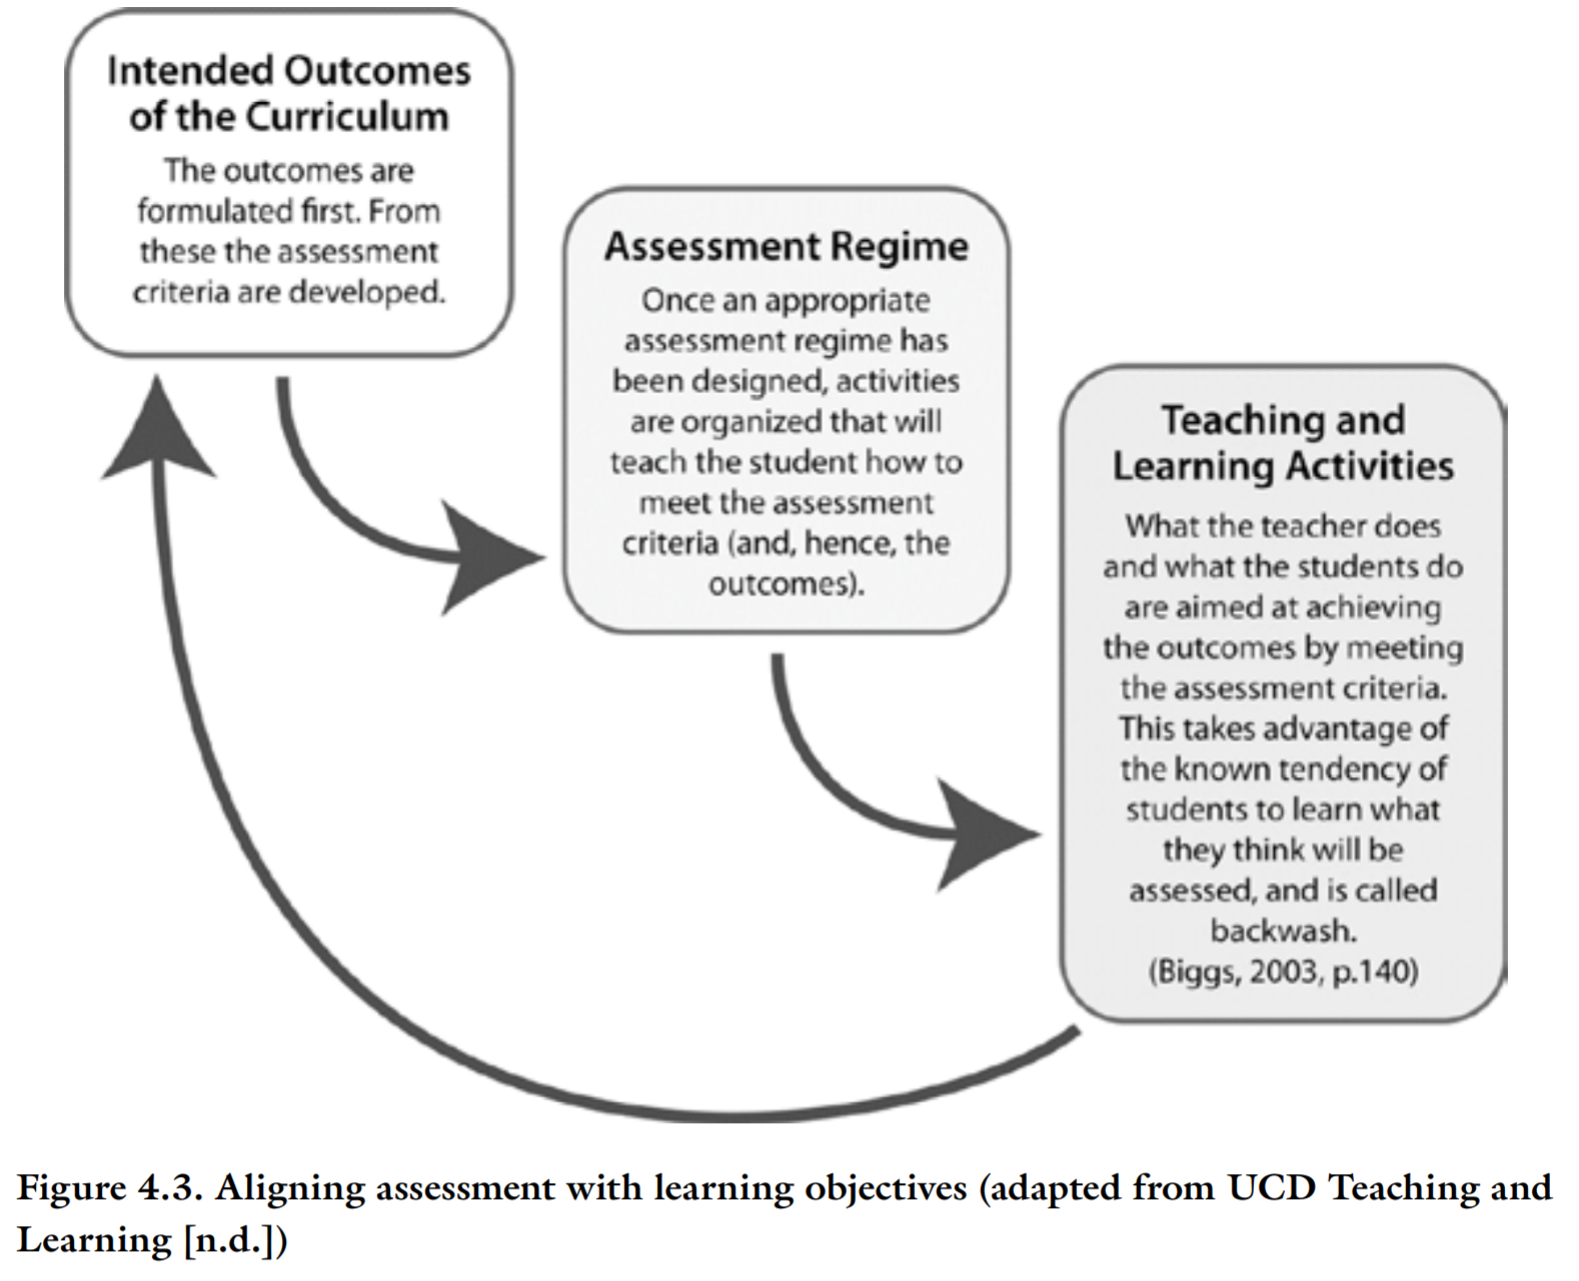 Aligning assessment with learning objectives